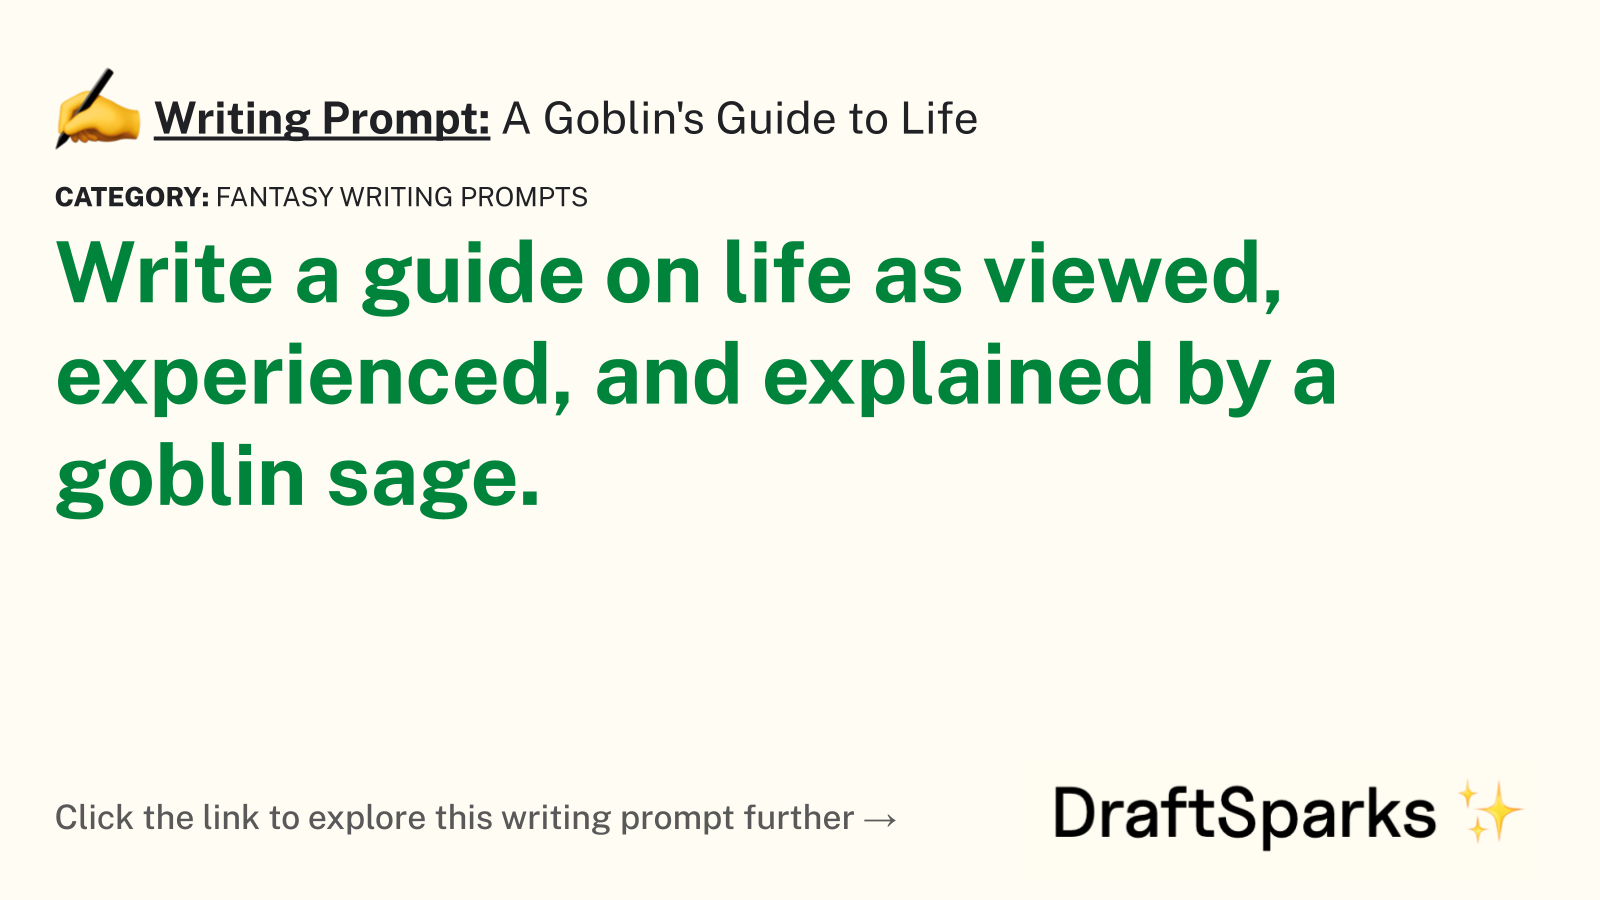 A Goblin’s Guide to Life